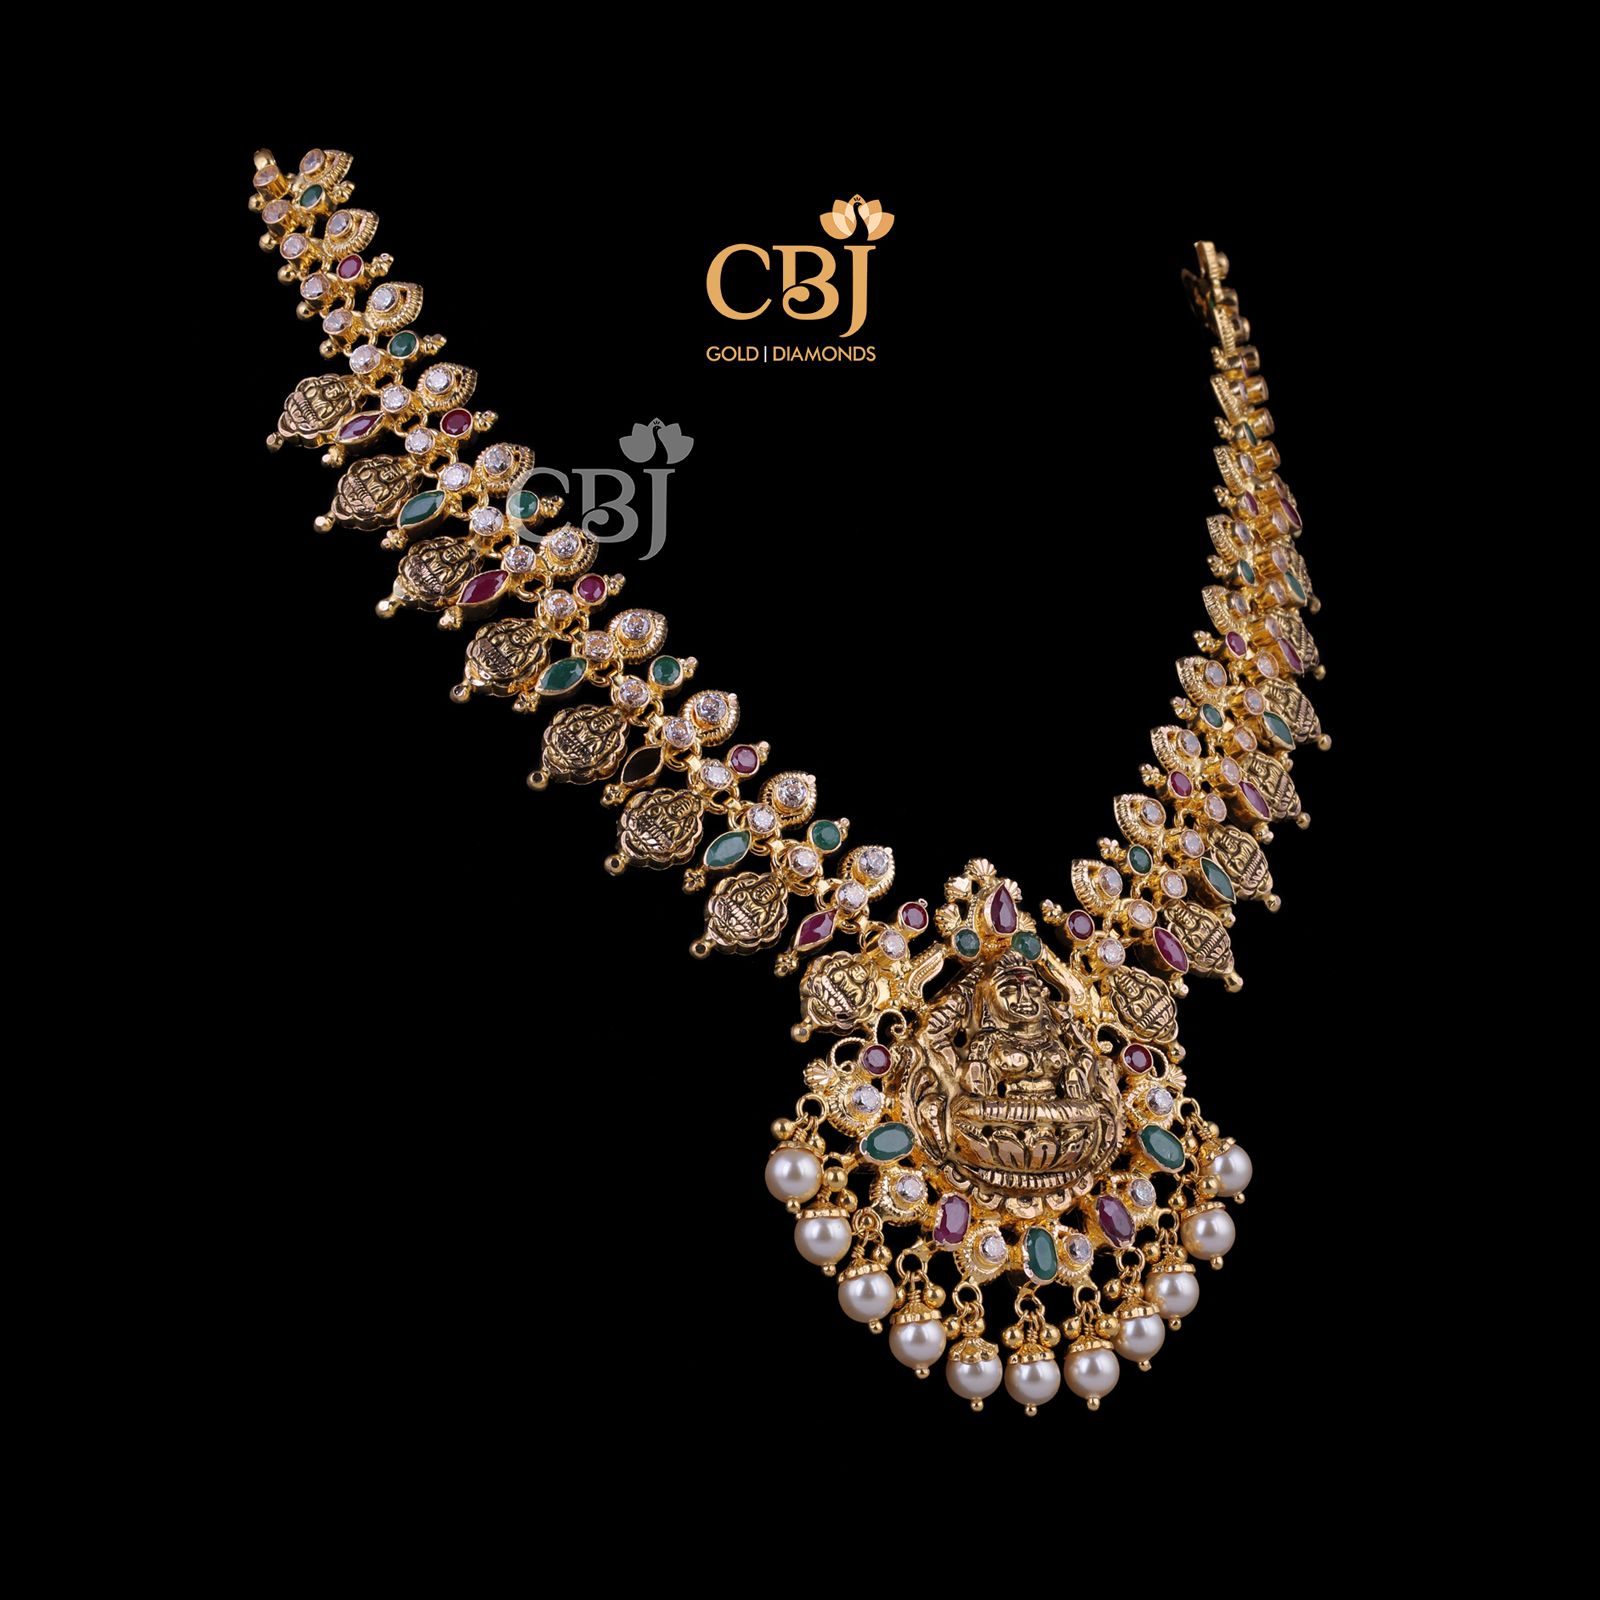 35 gm gold necklace